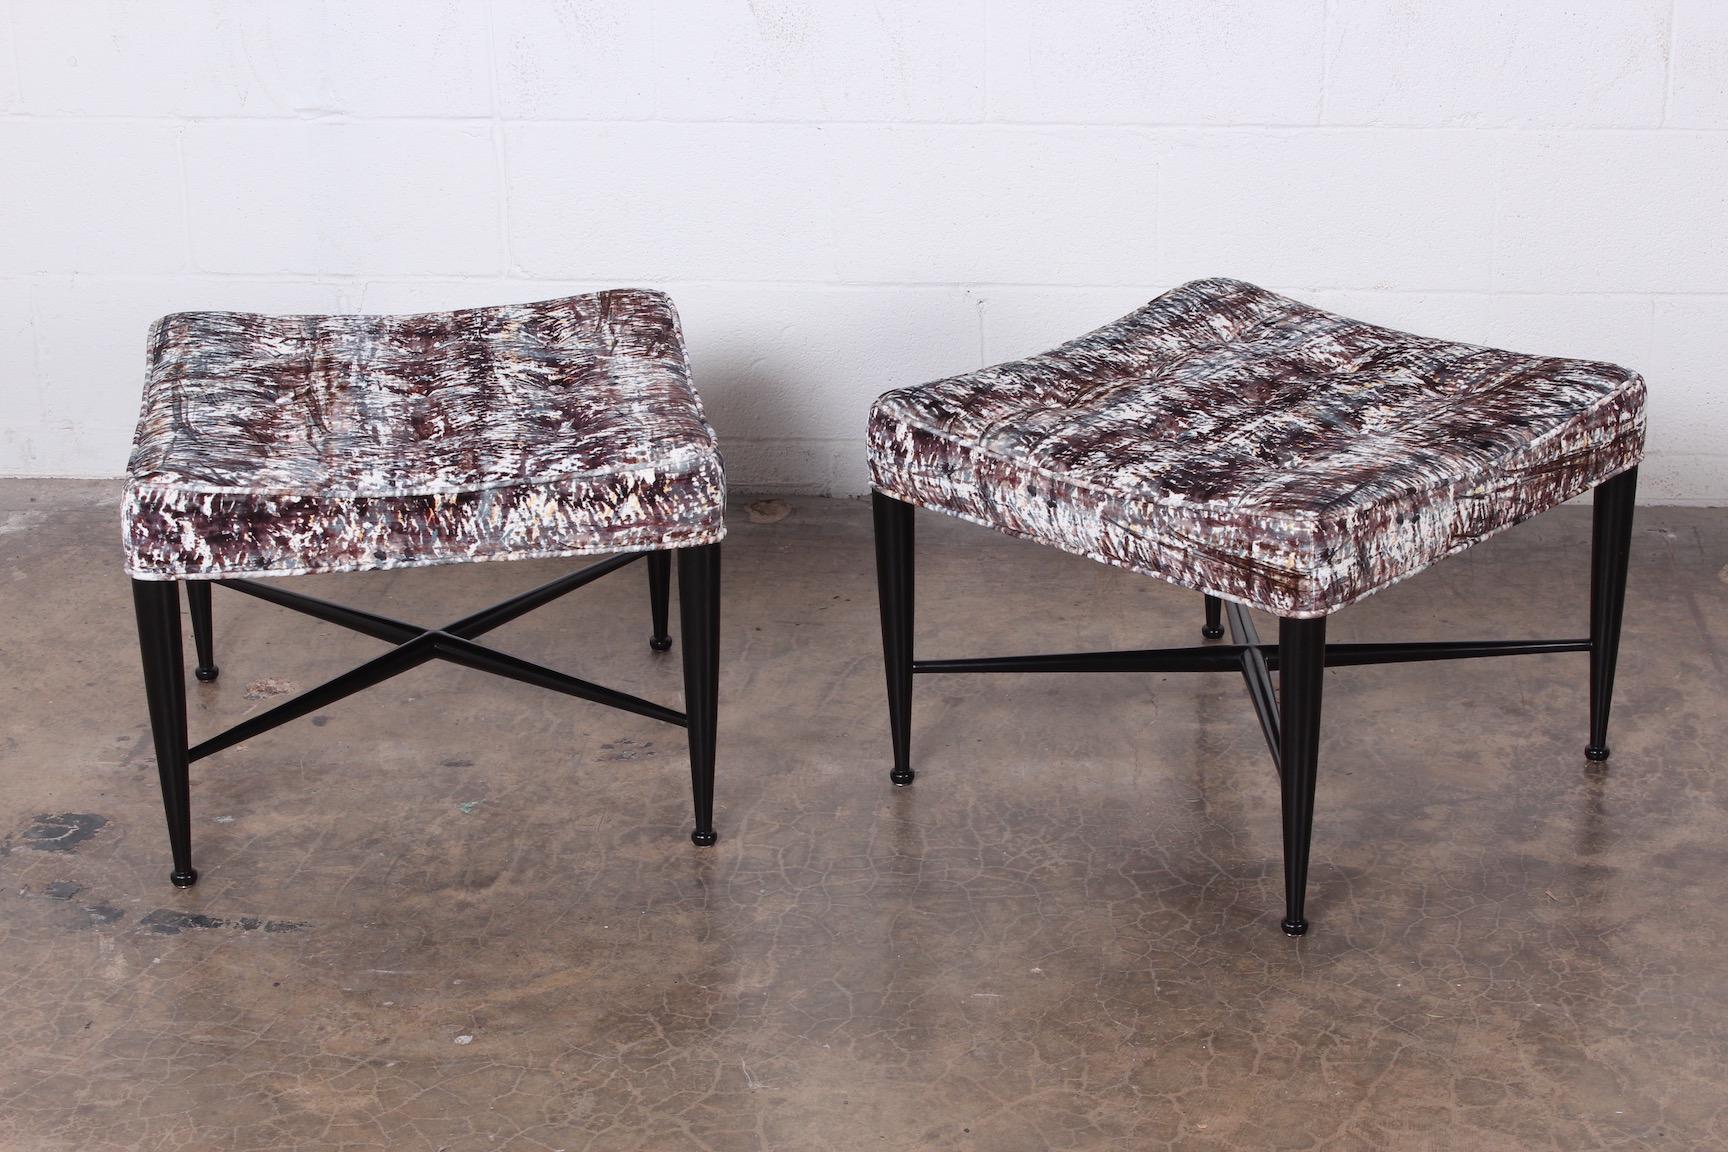 A beautifully restored pair of Dunbar Thebes stools designed by Edward Wormley.